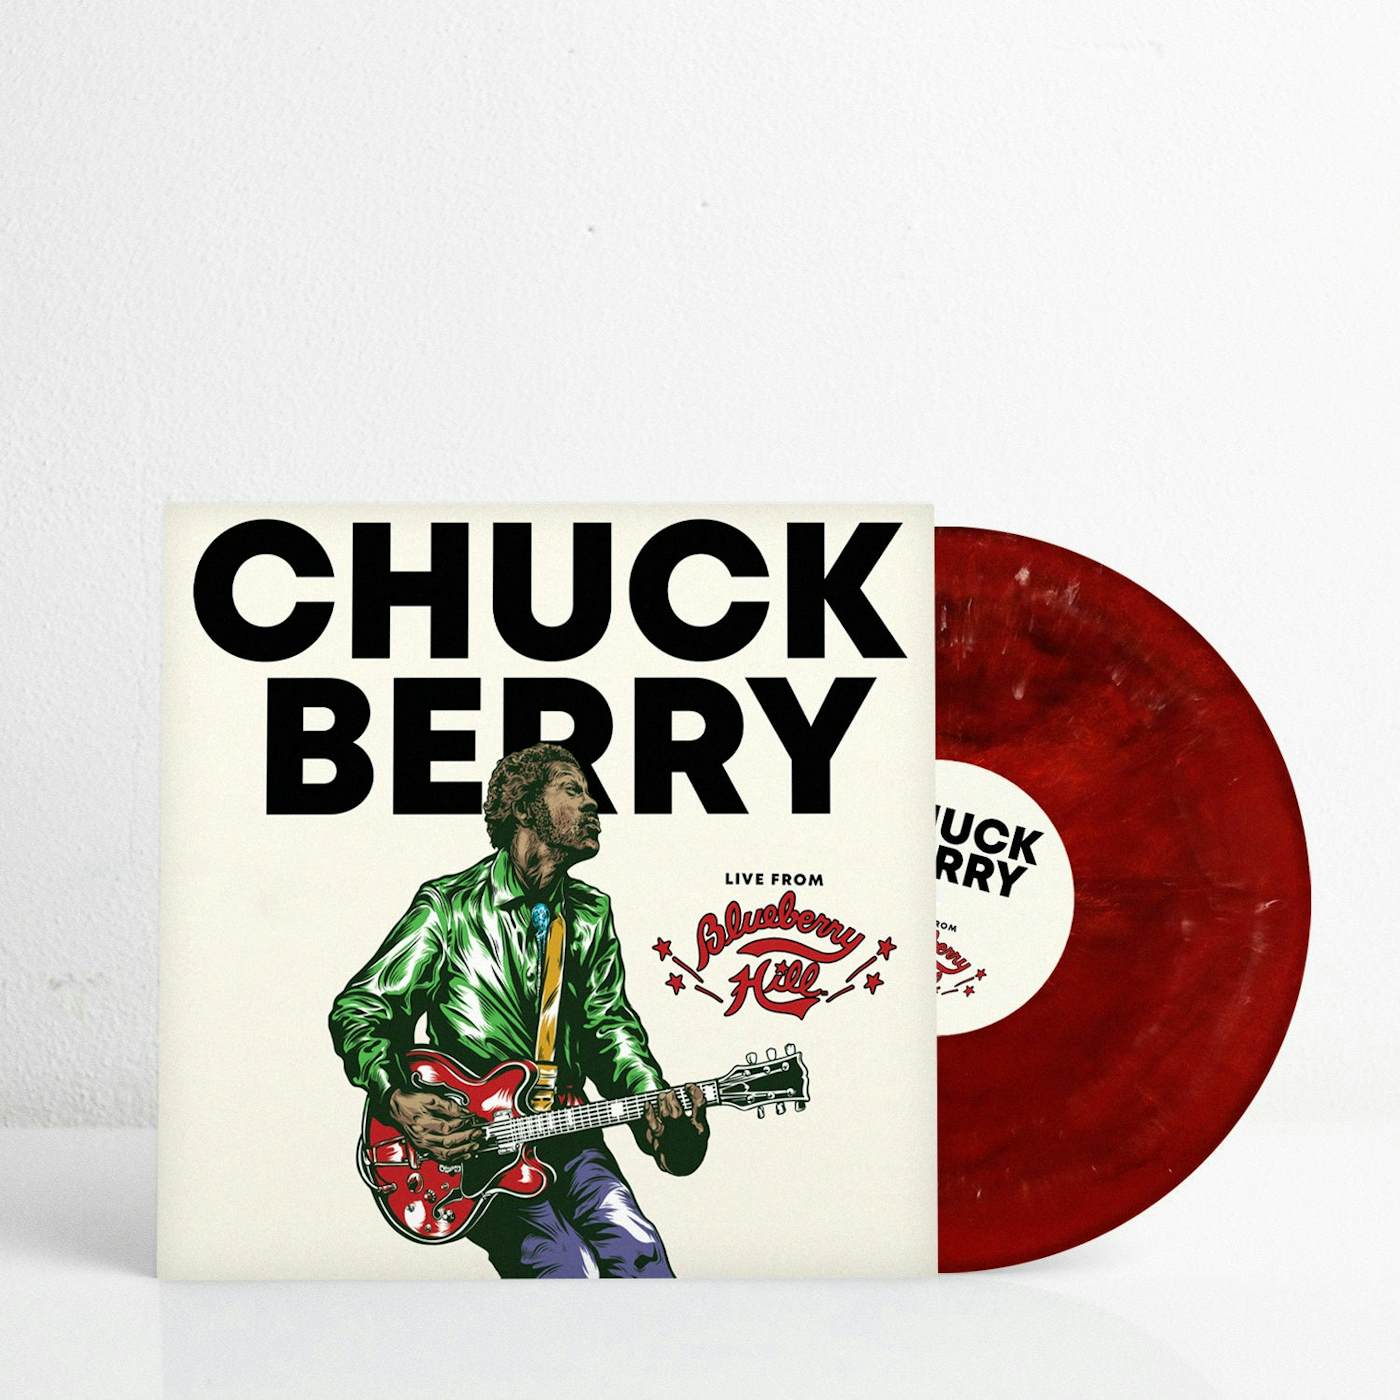 Chuck Berry Live from Blueberry Hill (Ltd. Edition Vinyl)